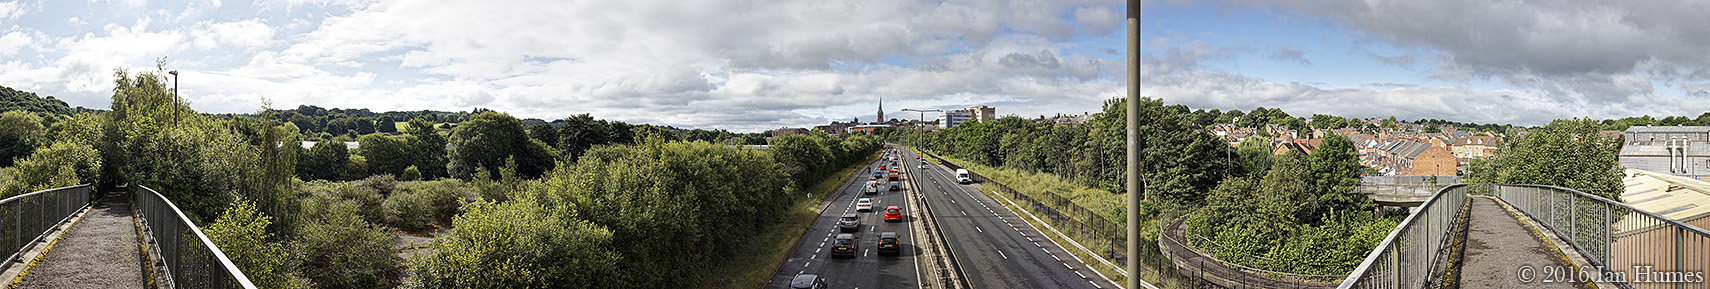 A61 Chesterfield - Derbyshire